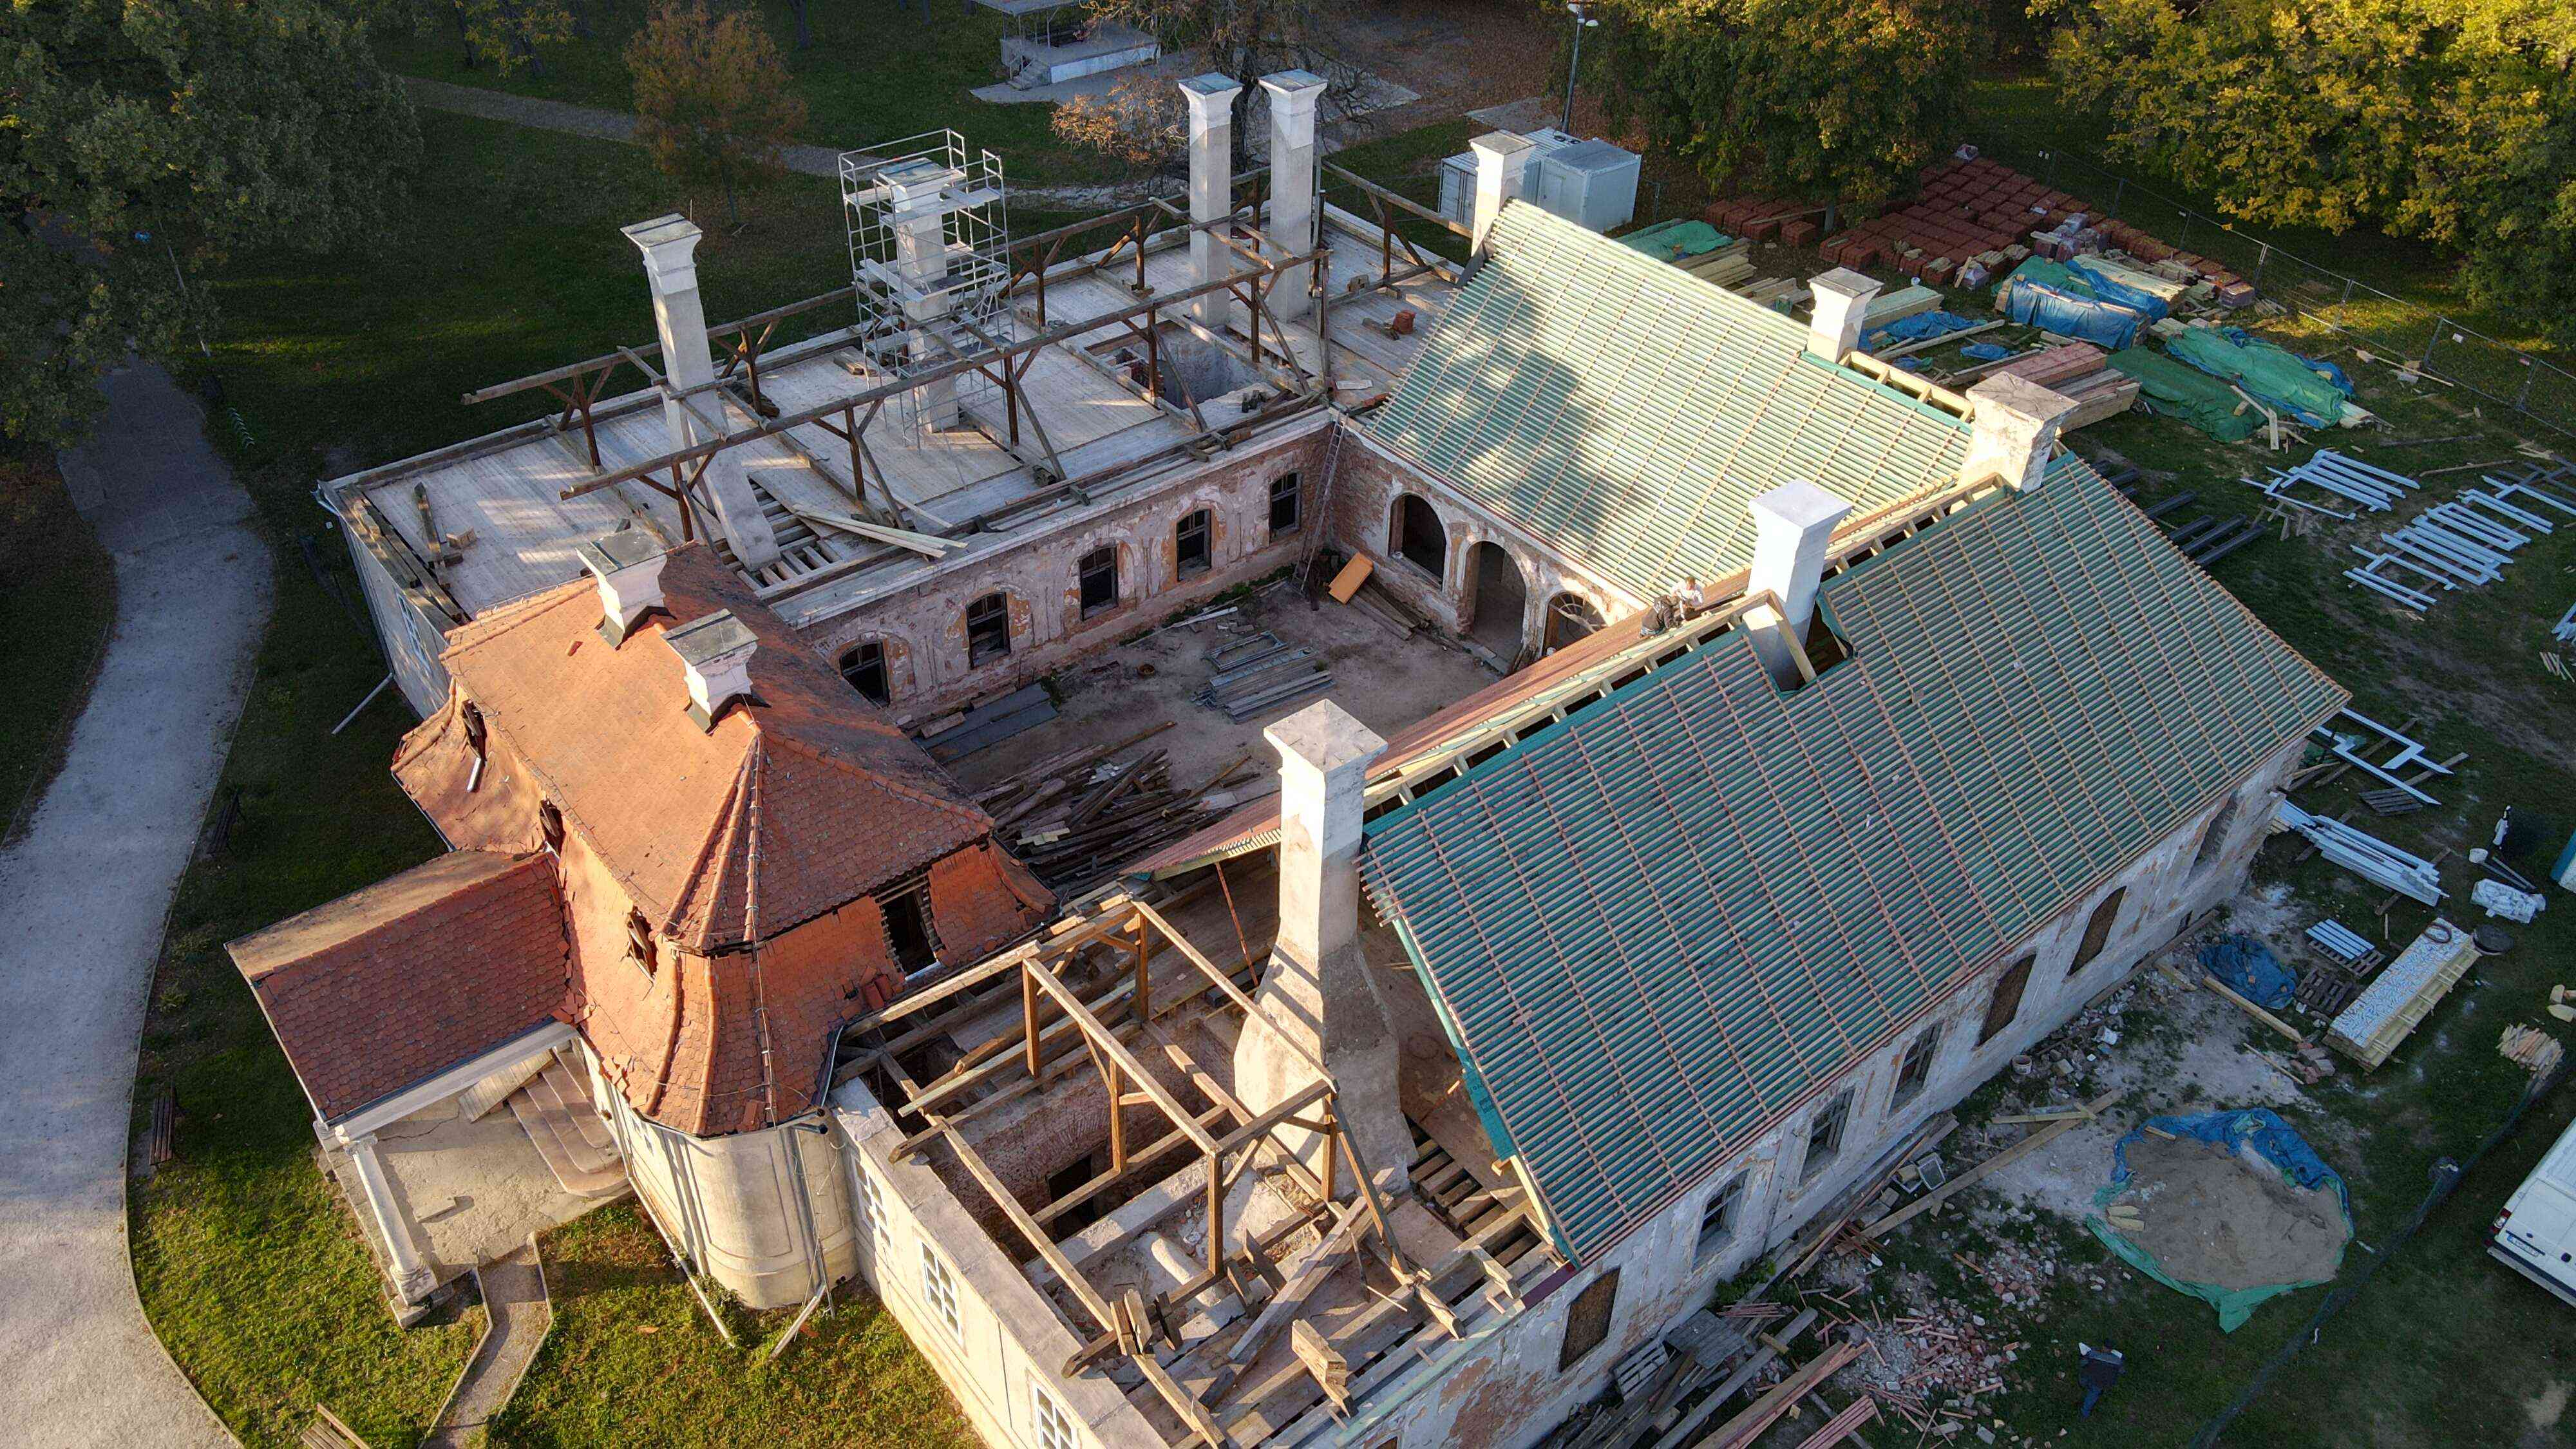 Thanks to a sensitive renovation, the Želiezovce manor house will regain its original appearance 